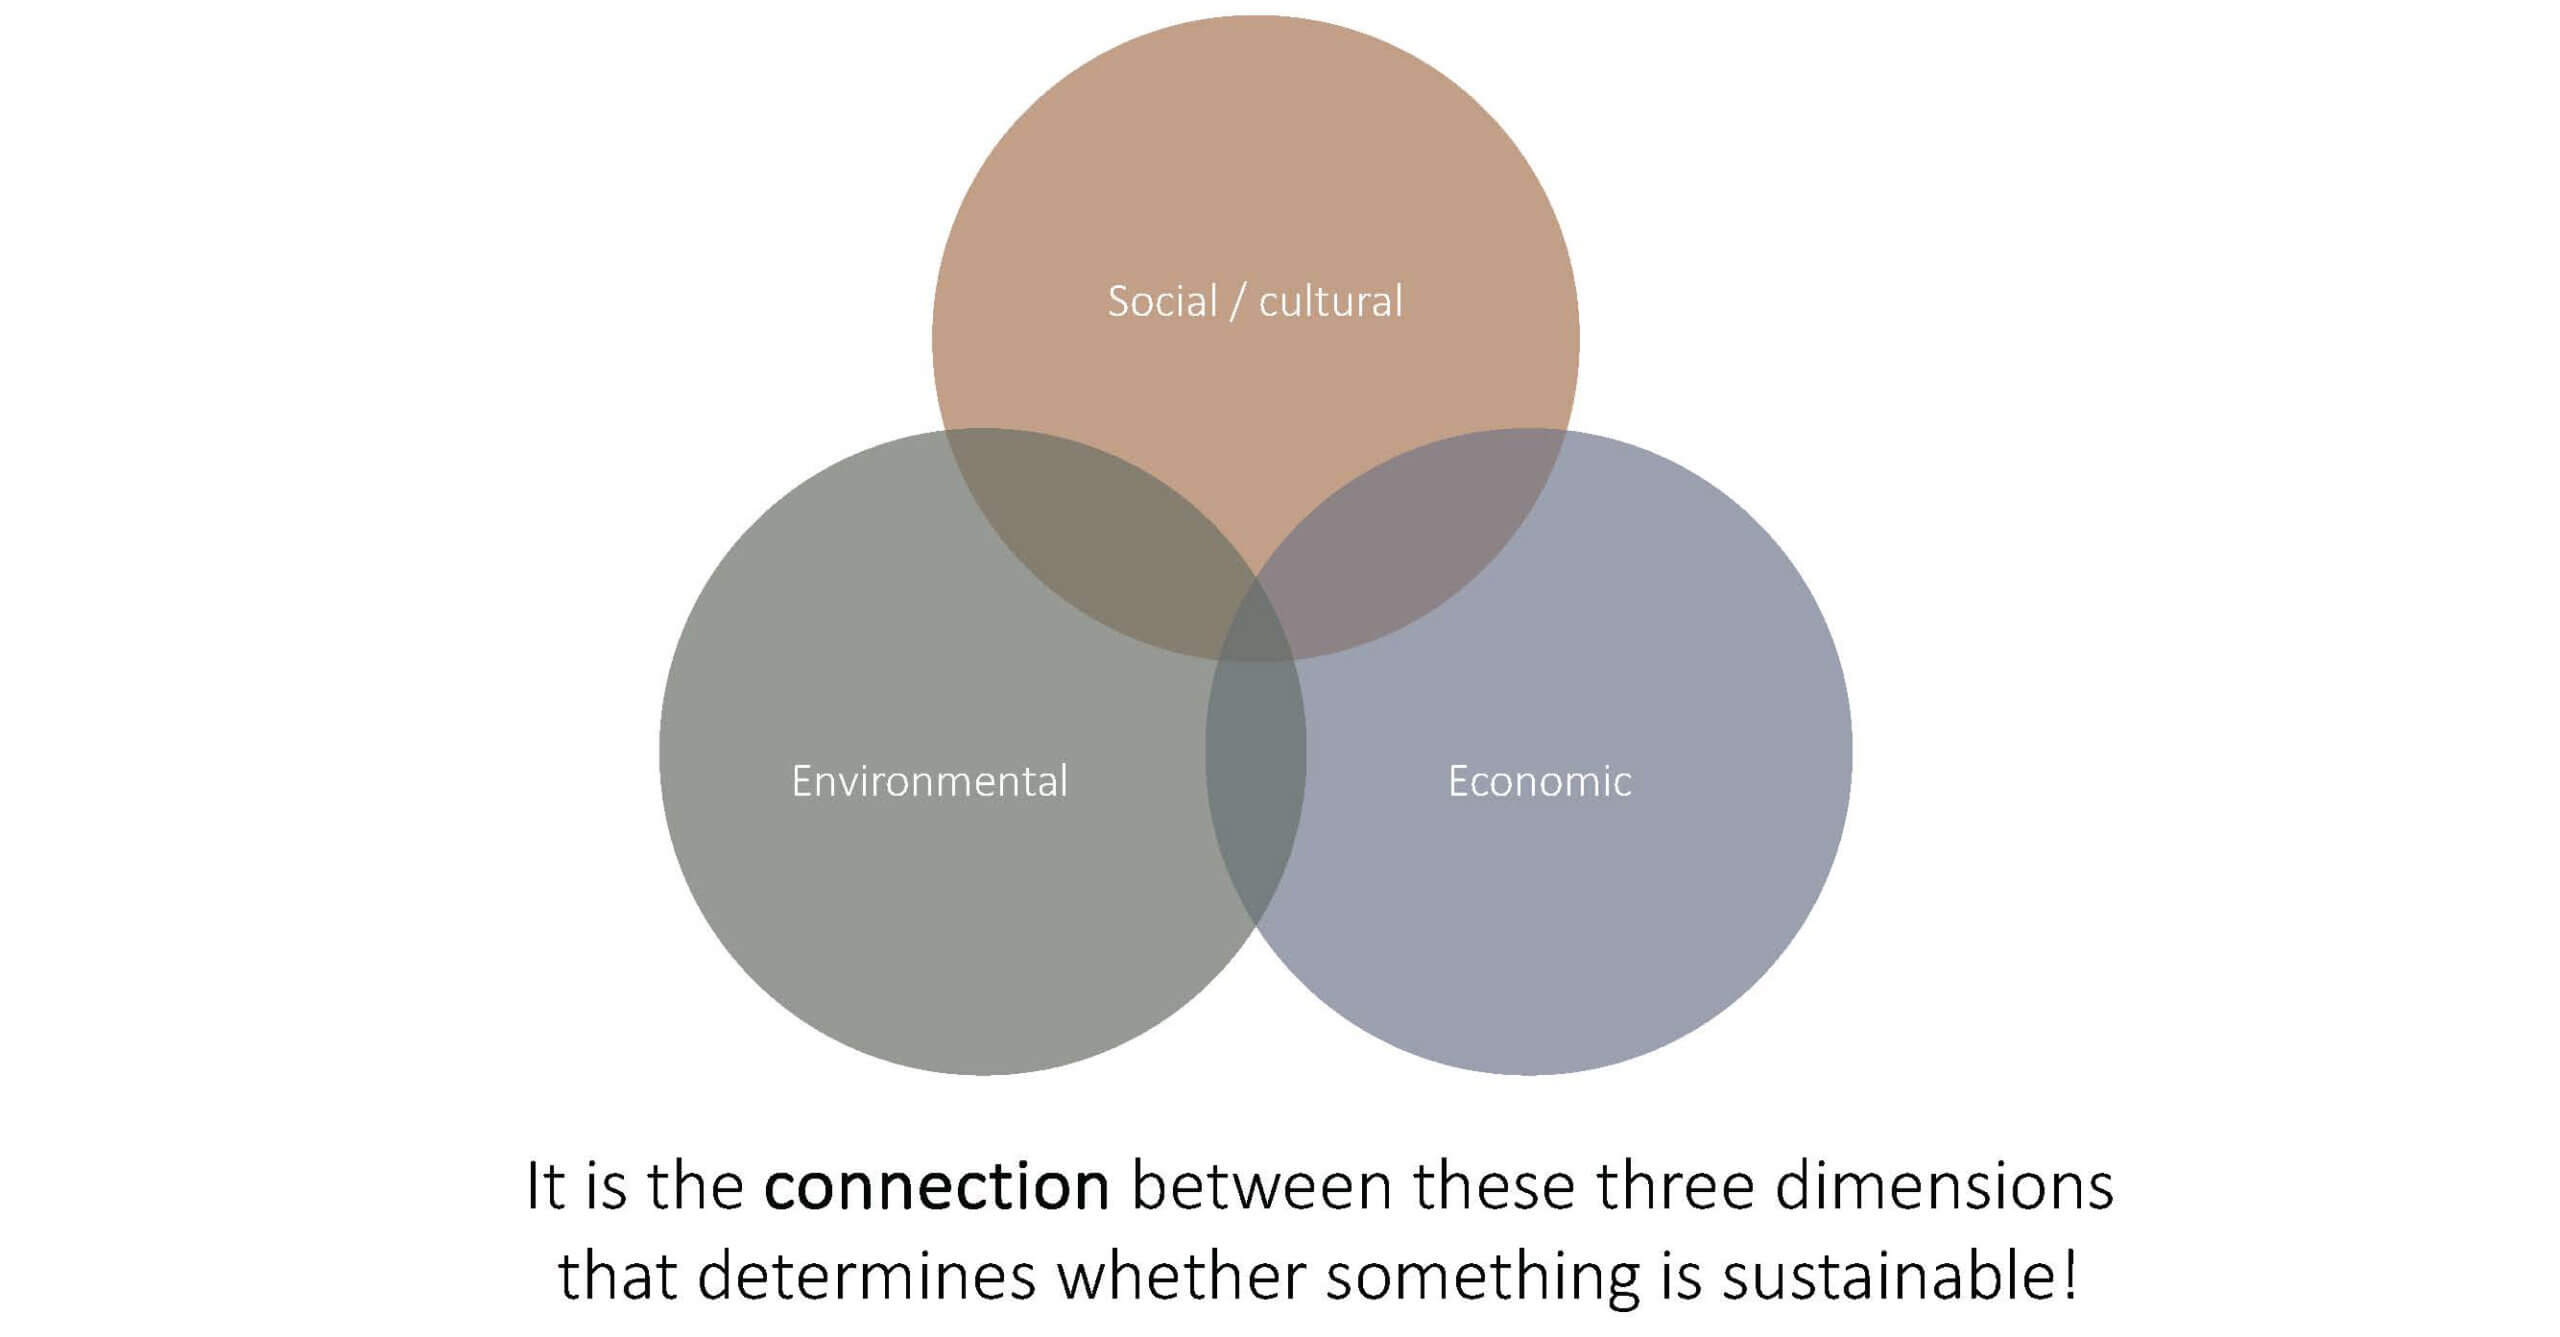 Venn diagram of social, economic, and environmental dimensions and stating that it is the intersection of these that determines sustainability.